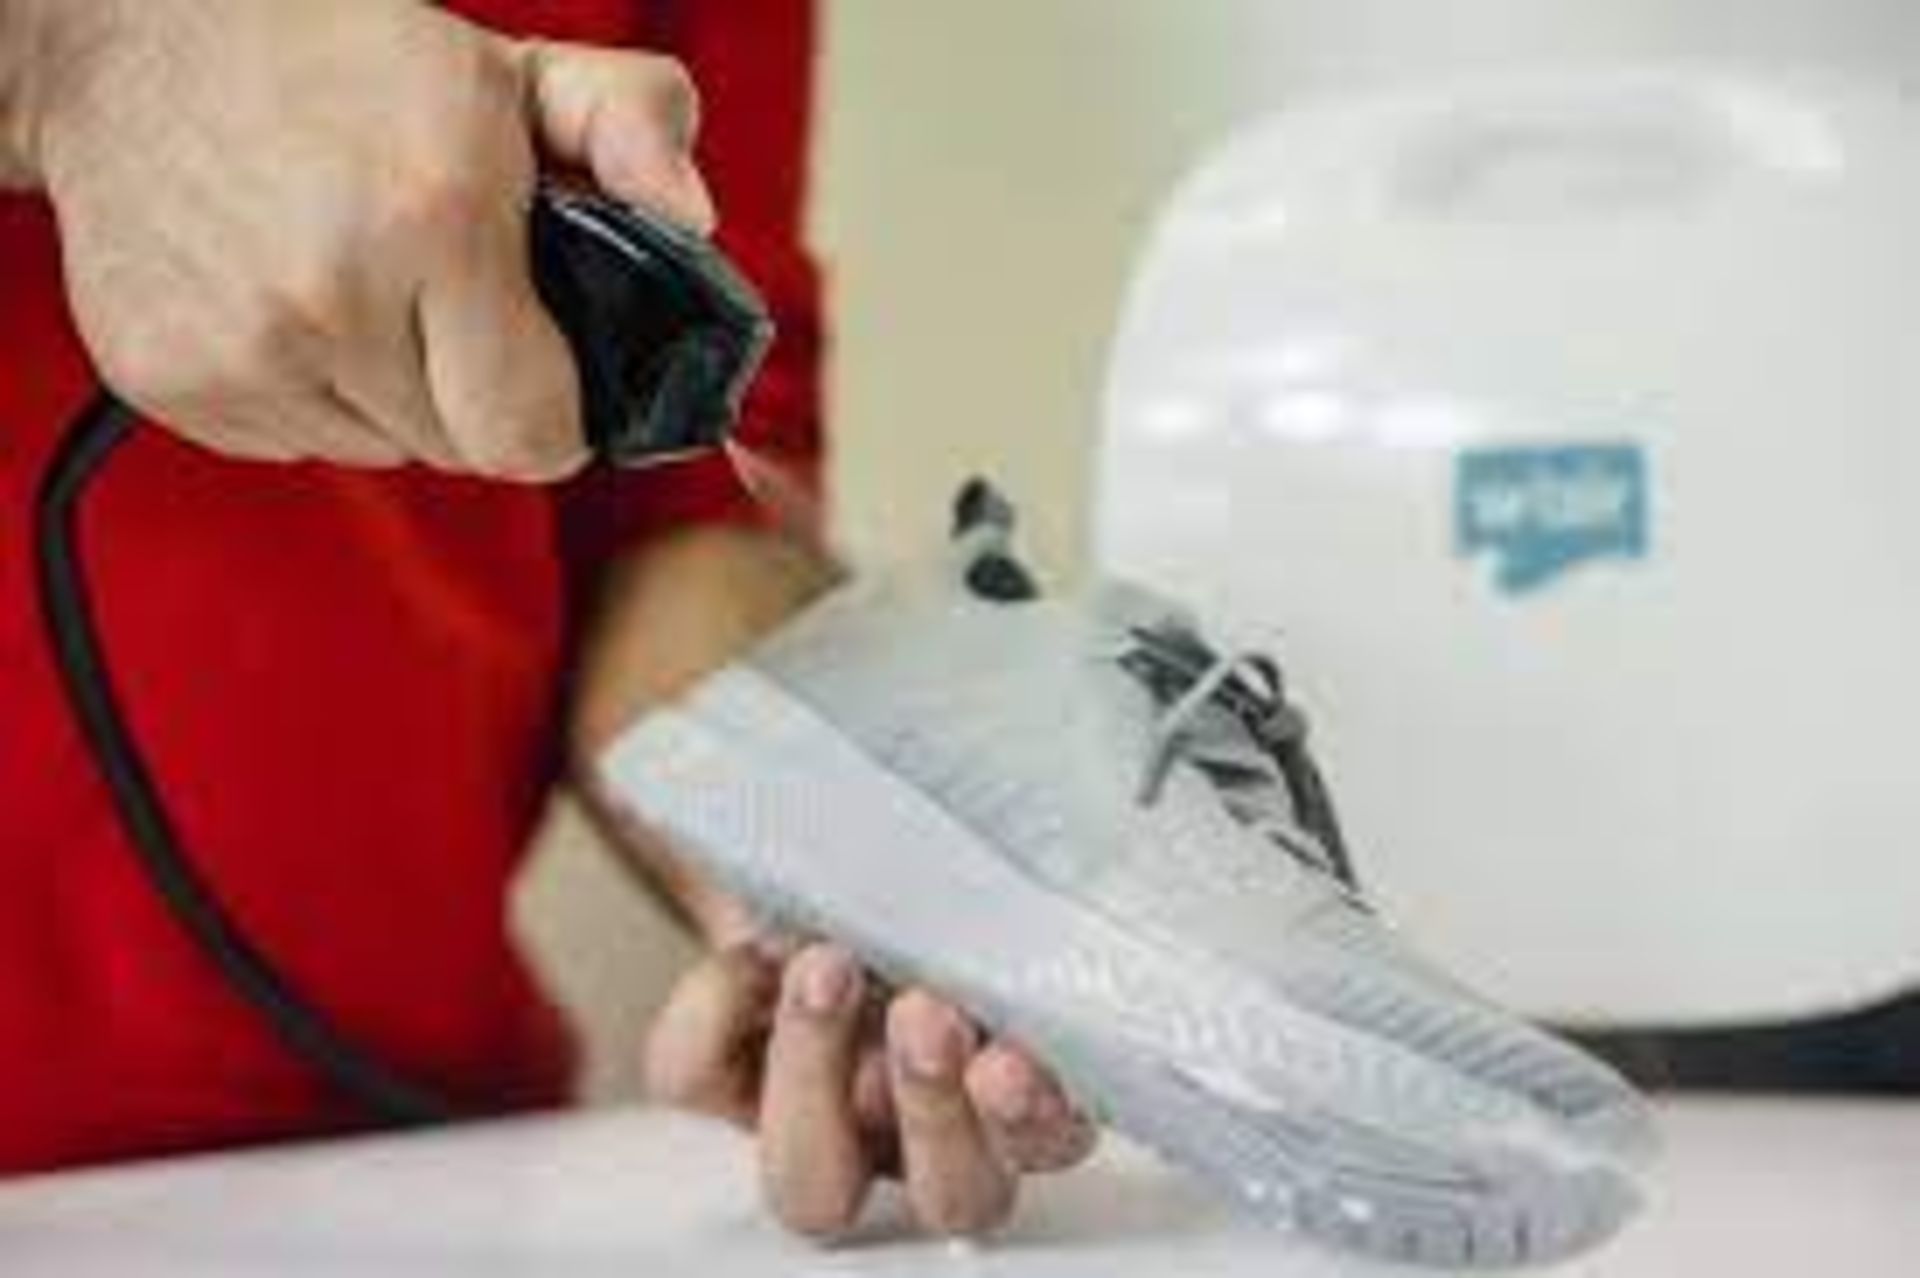 BRAND NEW W'AIR SNEAKER CLEANING SYSTEMS RRP £299, The w'air uses hydrodynamic technology - Image 4 of 6